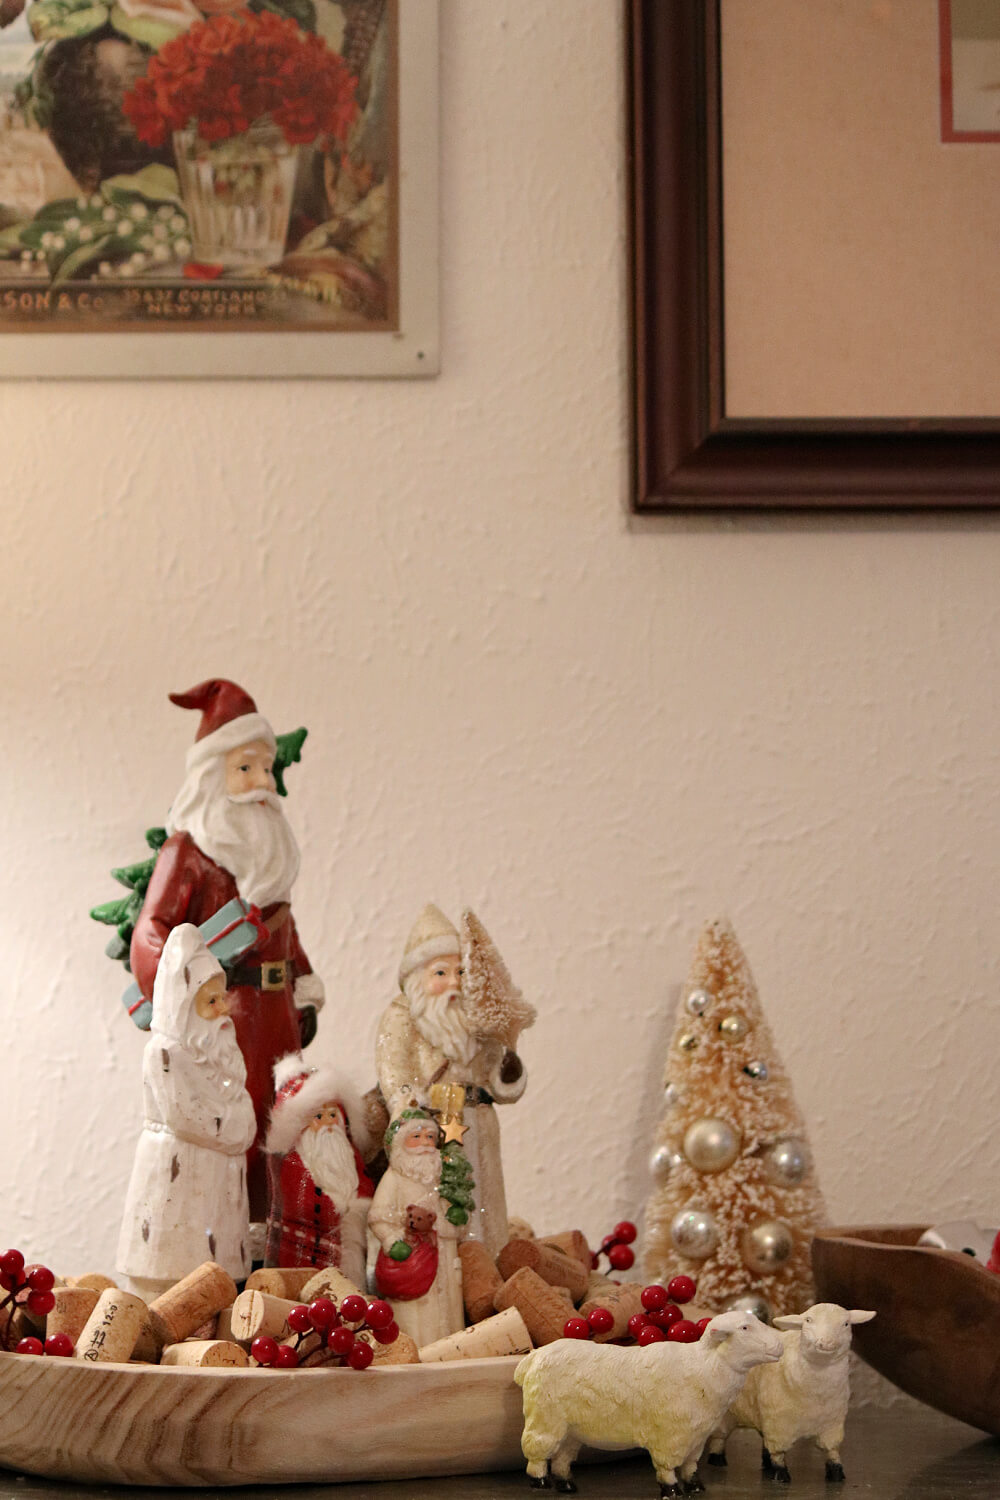 In Dining Room Santa Vignettes, Holiday vignettes on the sideboard along the dining space wall